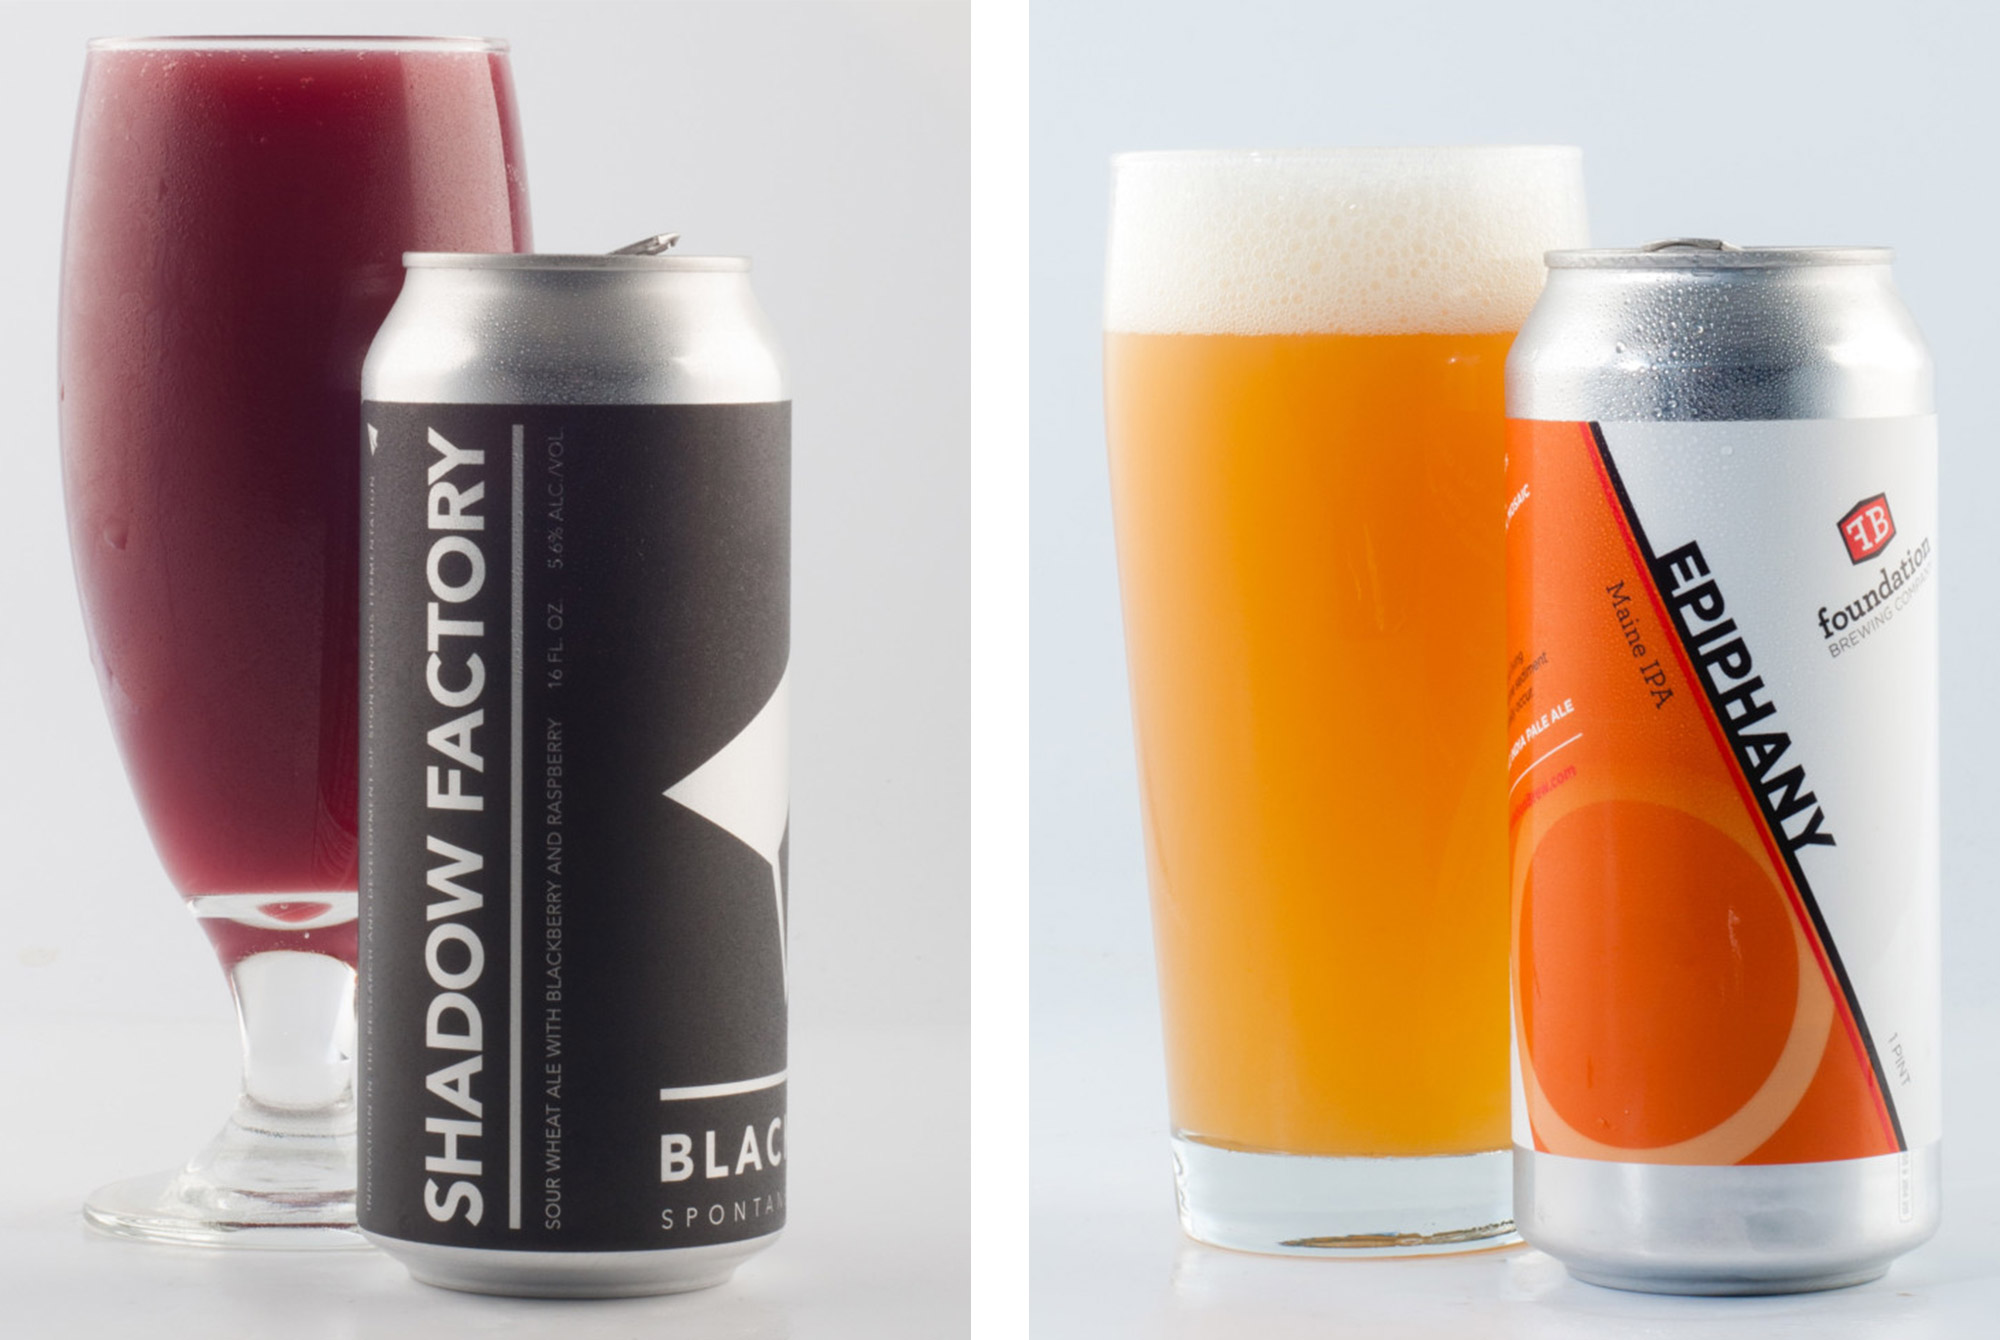 The Top 5 Beers You Can Buy Online If You Live in Illinois